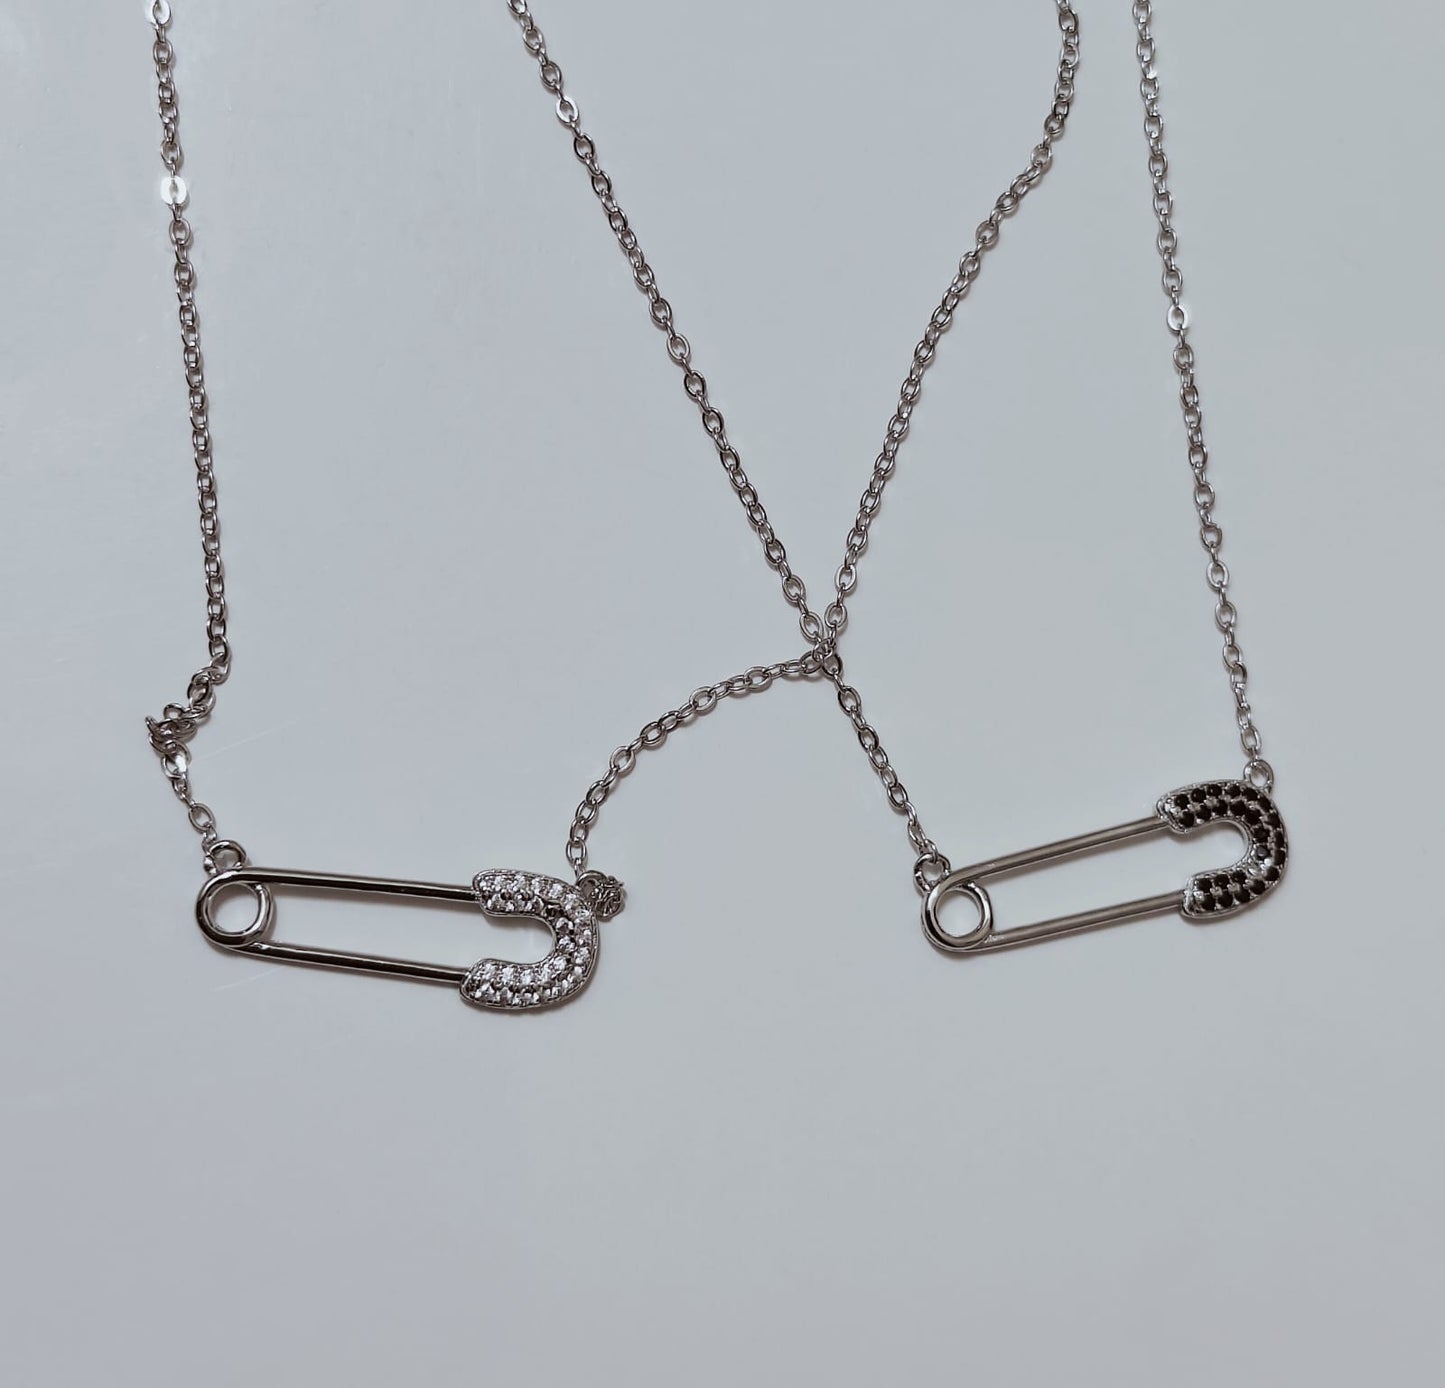 The Dainty Safety Pin Studded 925 Silver Necklace